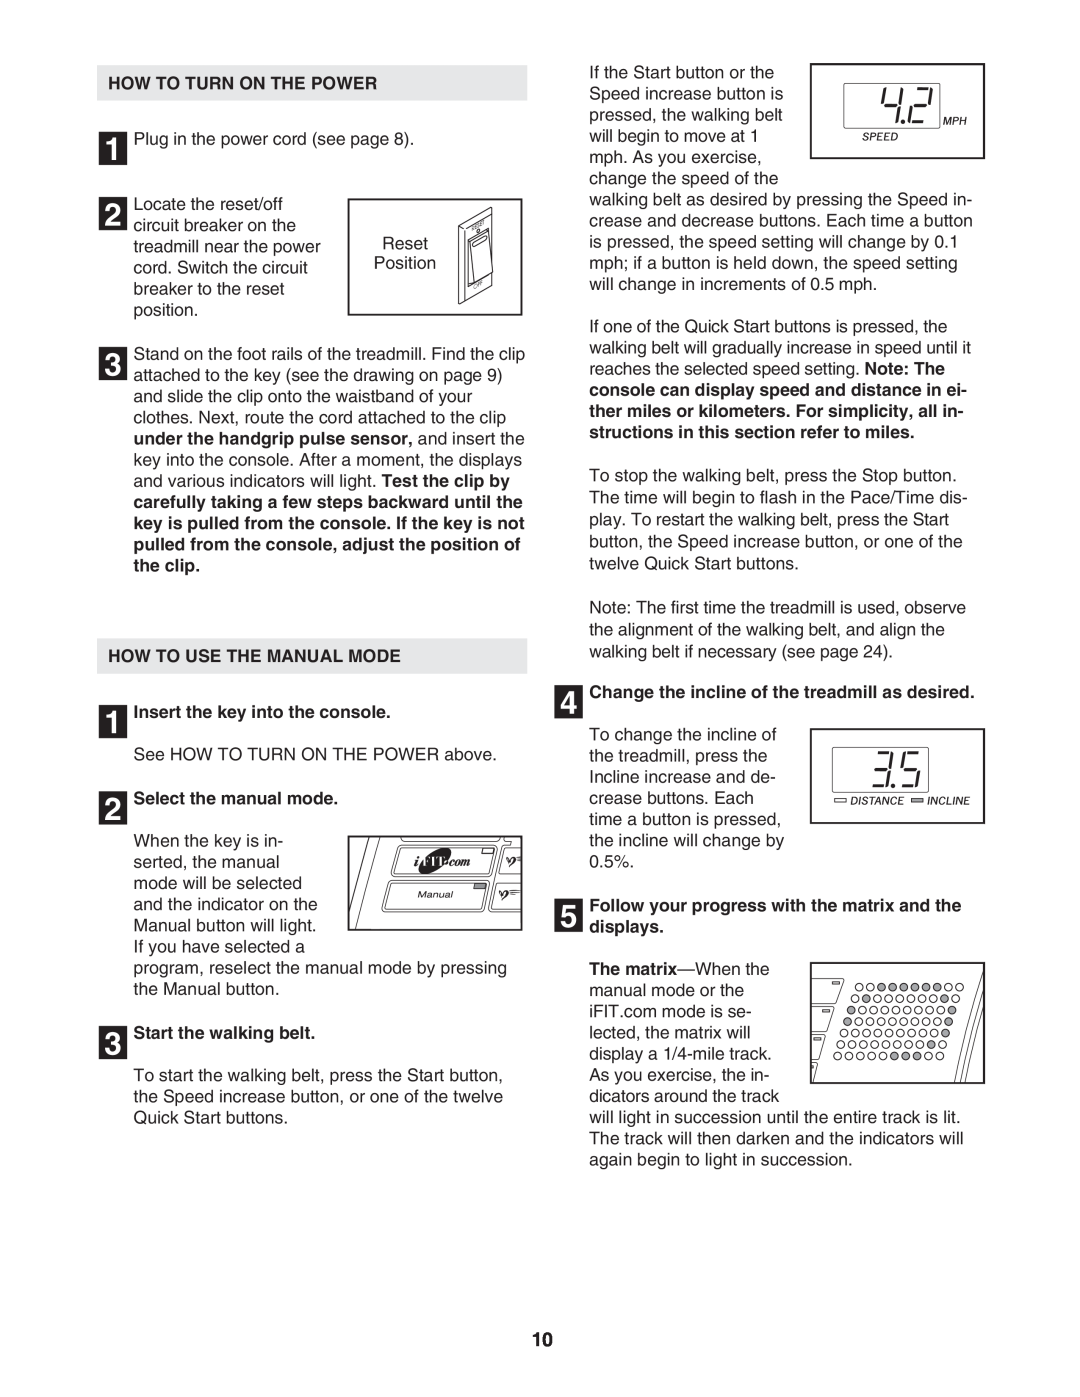 ProForm DTL73942 user manual How To Turn On The Power, HOW TO USE THE MANUAL MODE 1 Insert the key into the console 